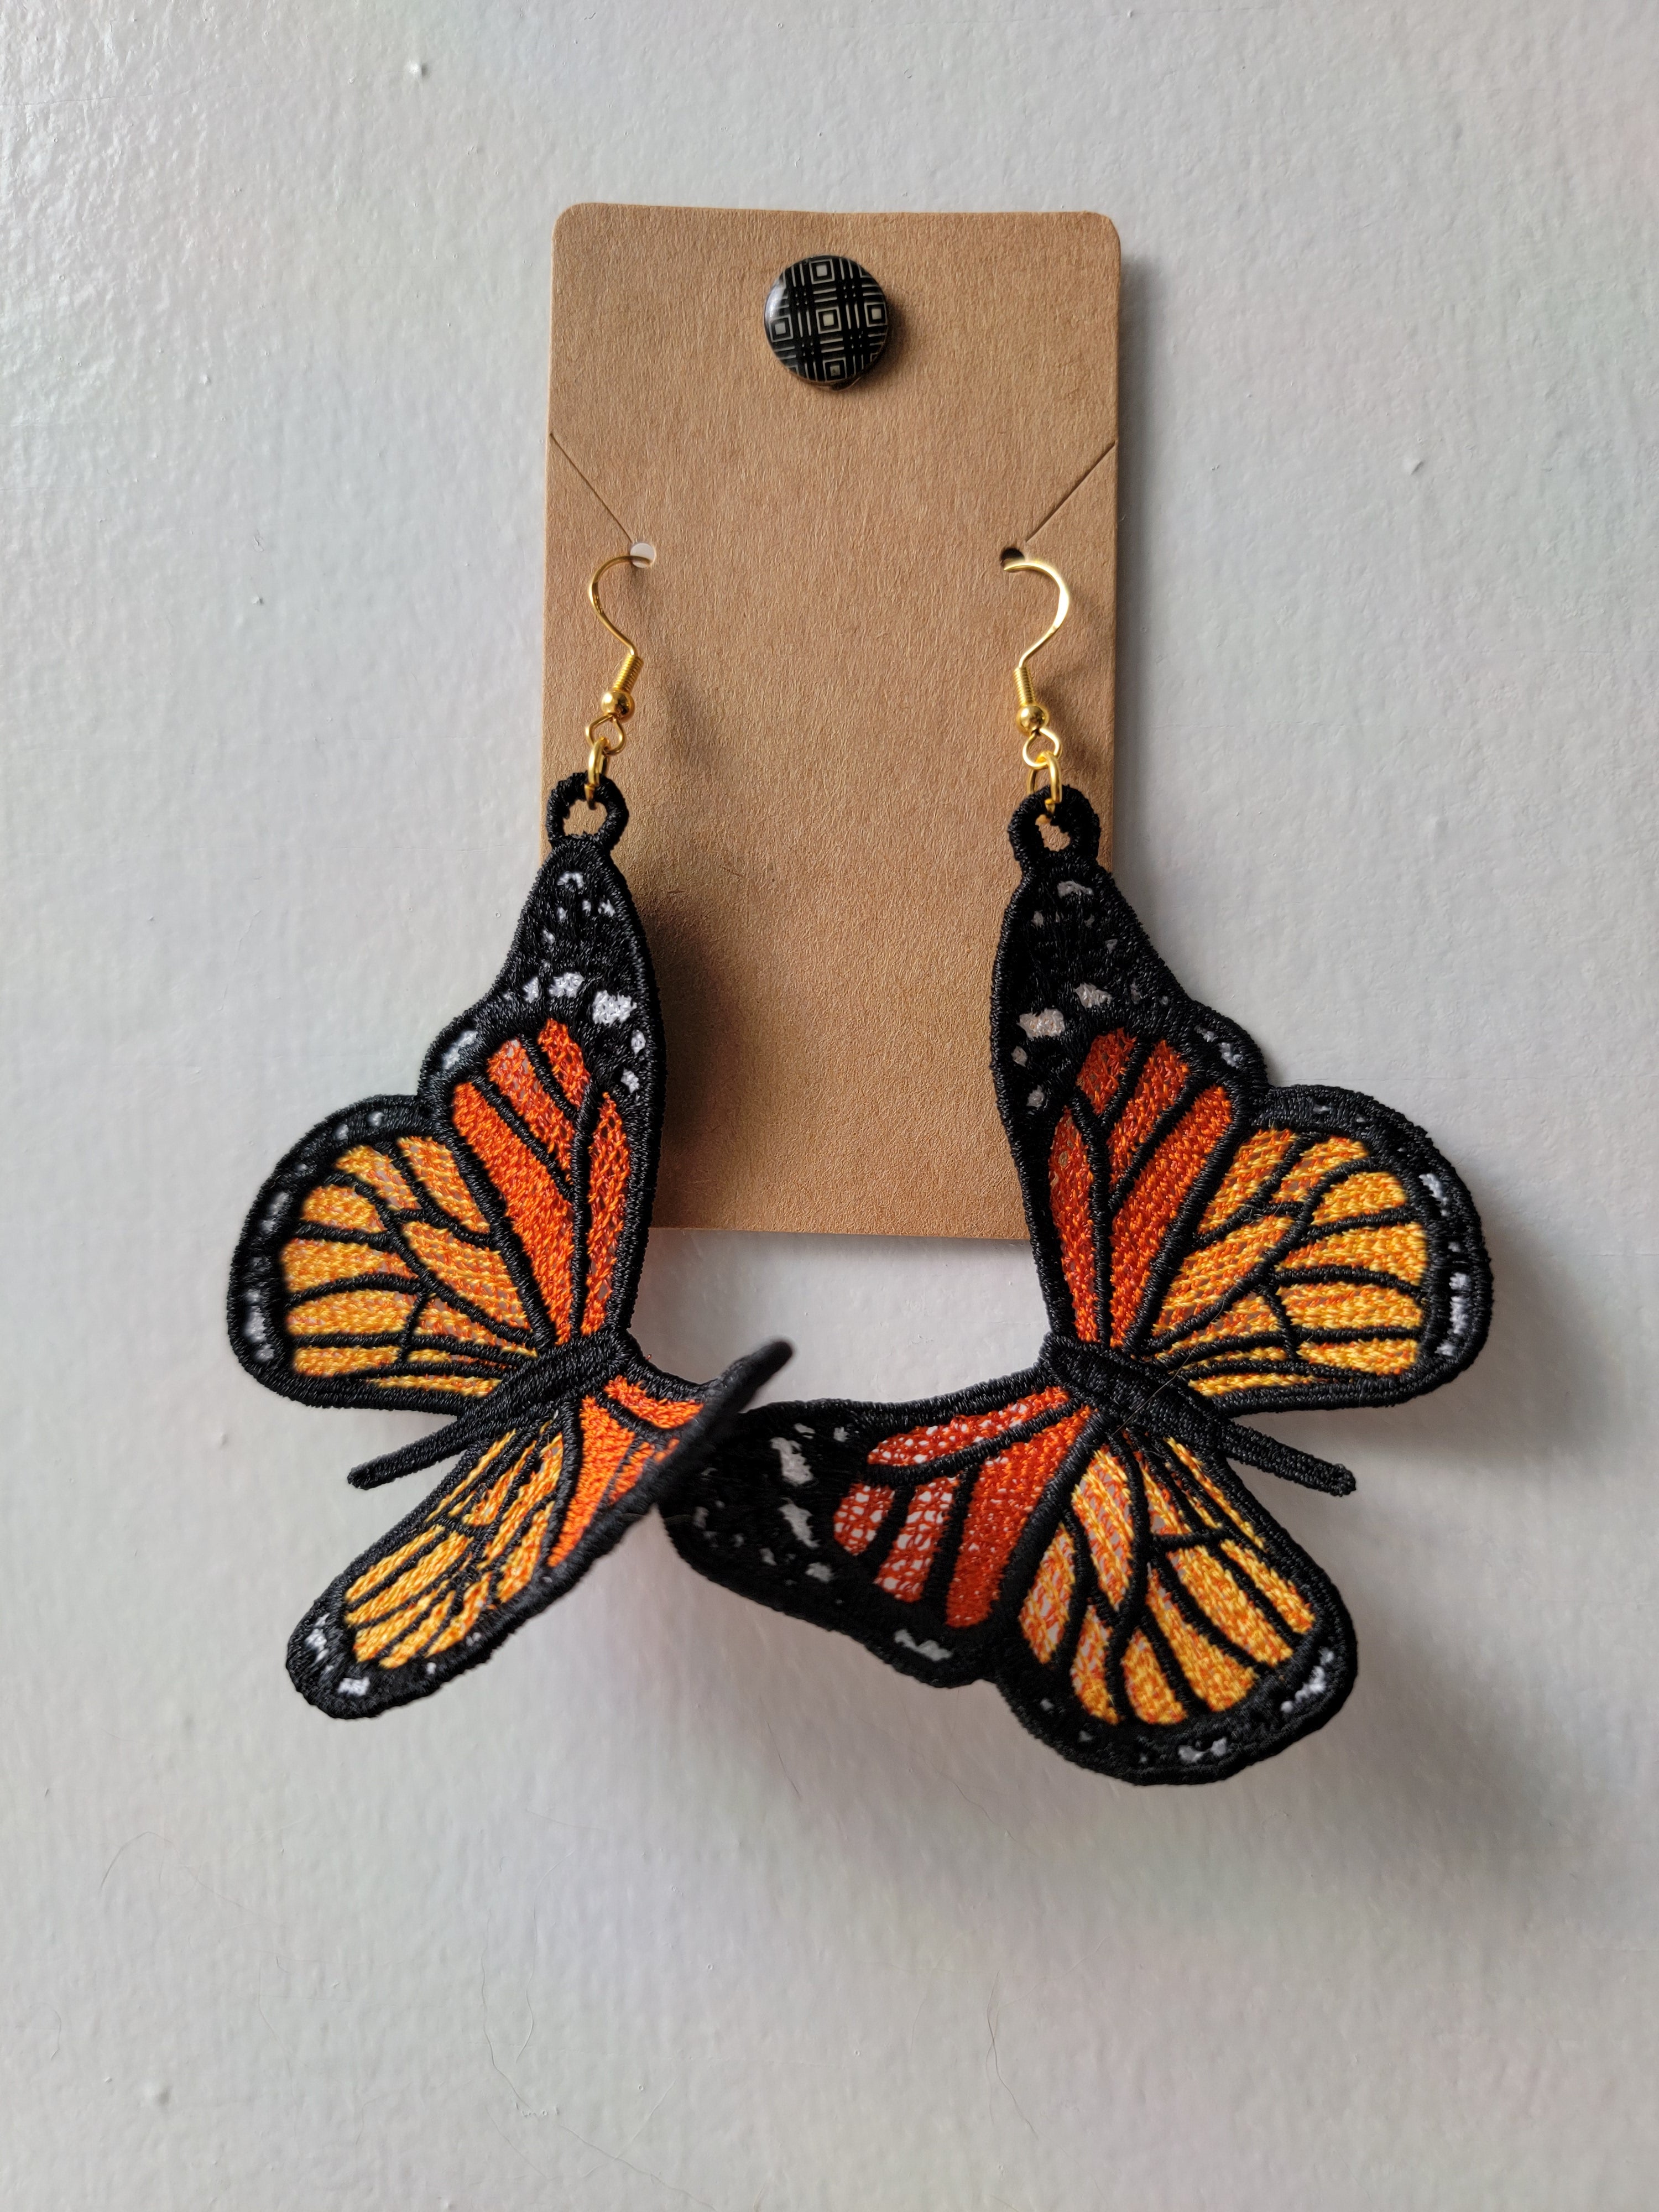 BLACK AND WHITE DIAMOND BUTTERFLY EARRINGS 001-710-01374 | Parkers' Karat  Patch | Asheville, NC